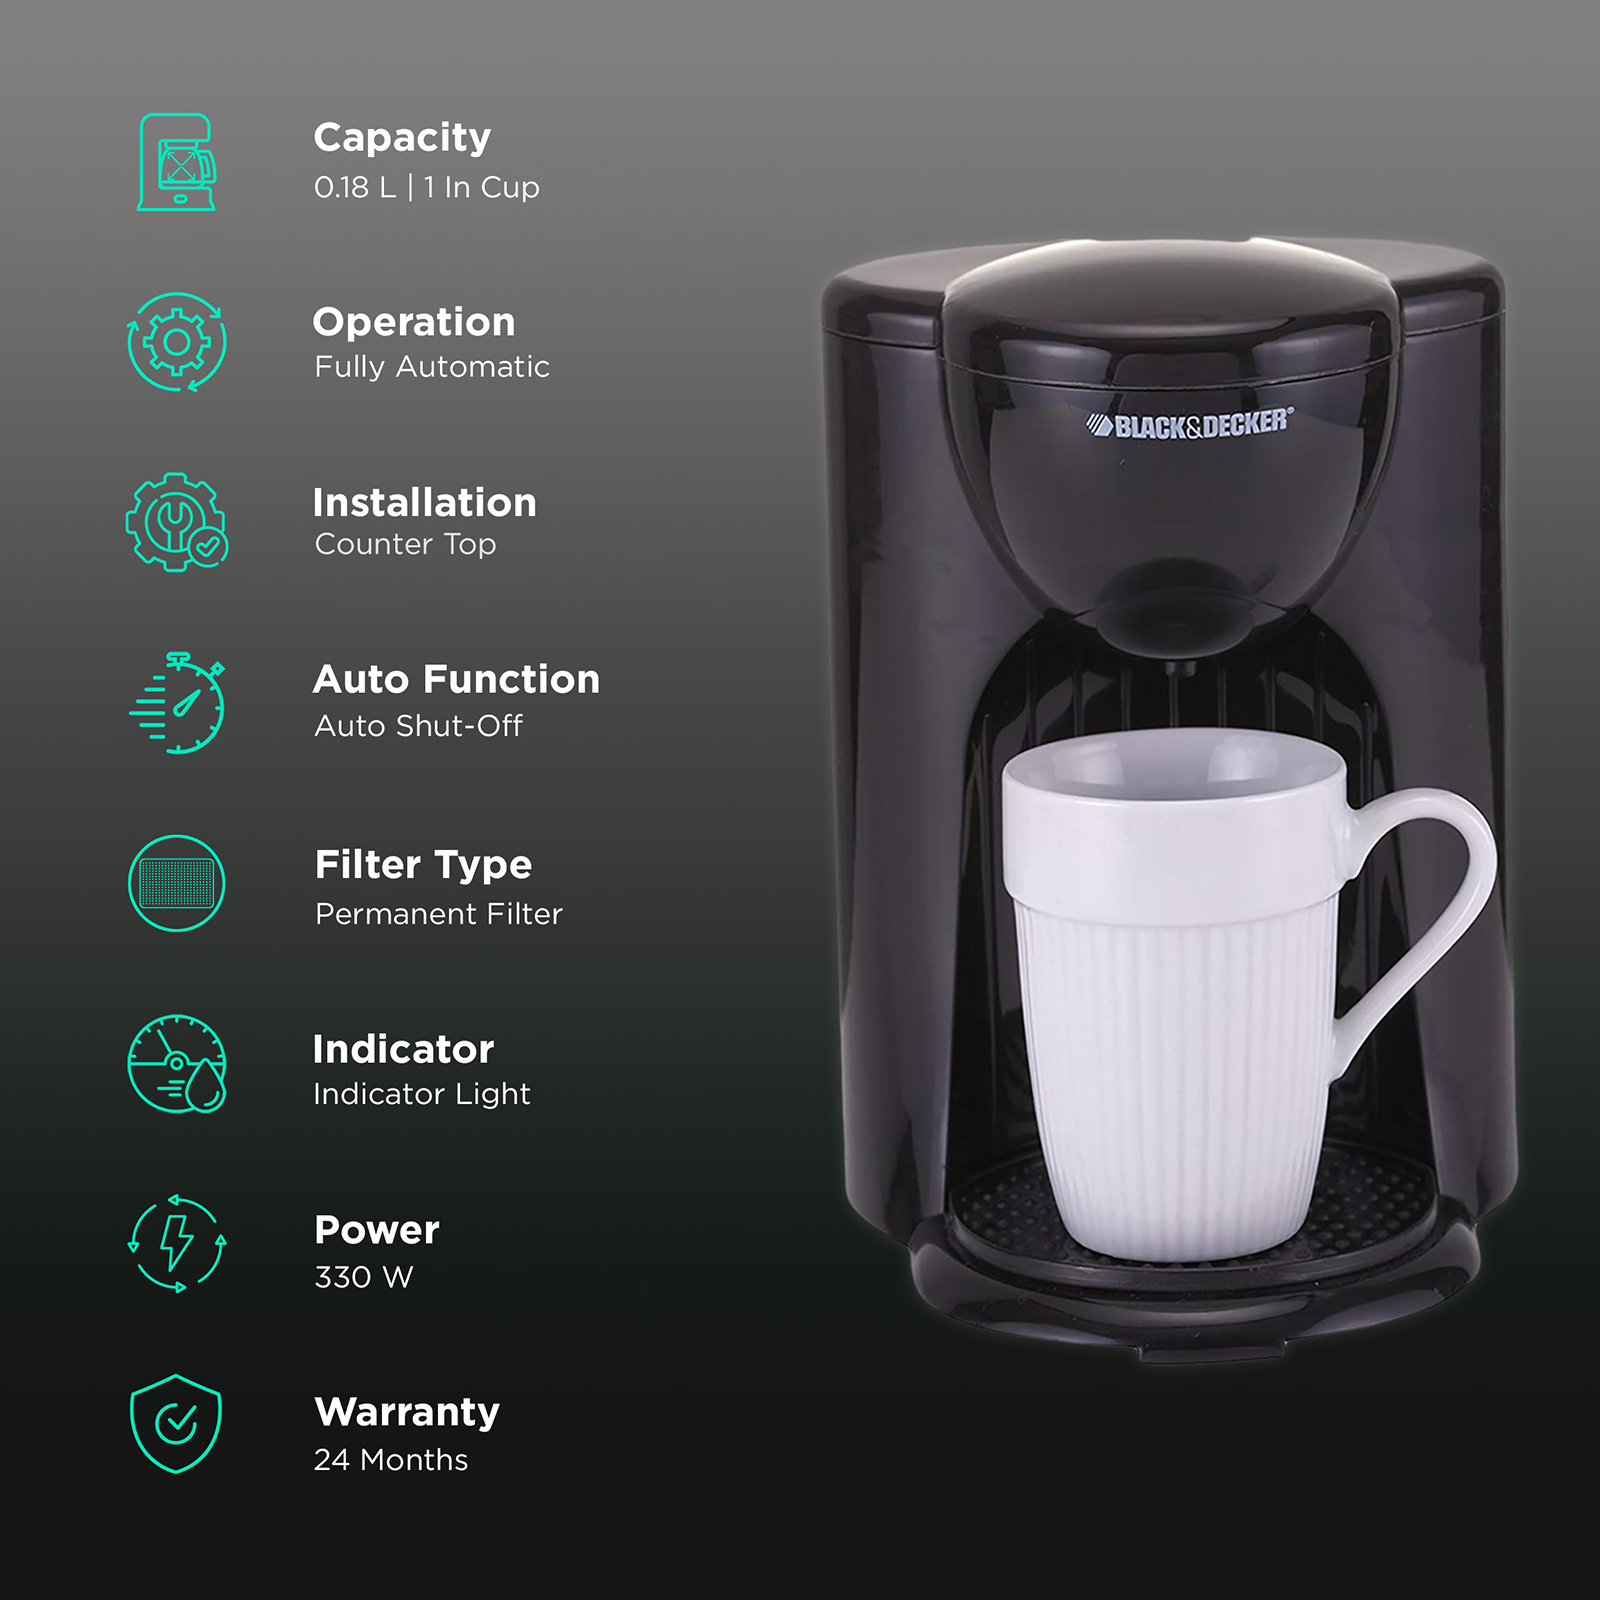 https://media.croma.com/image/upload/v1691675157/Croma%20Assets/Small%20Appliances/Coffee%20Tea%20Makers/Images/218036_2_qzi5mw.png